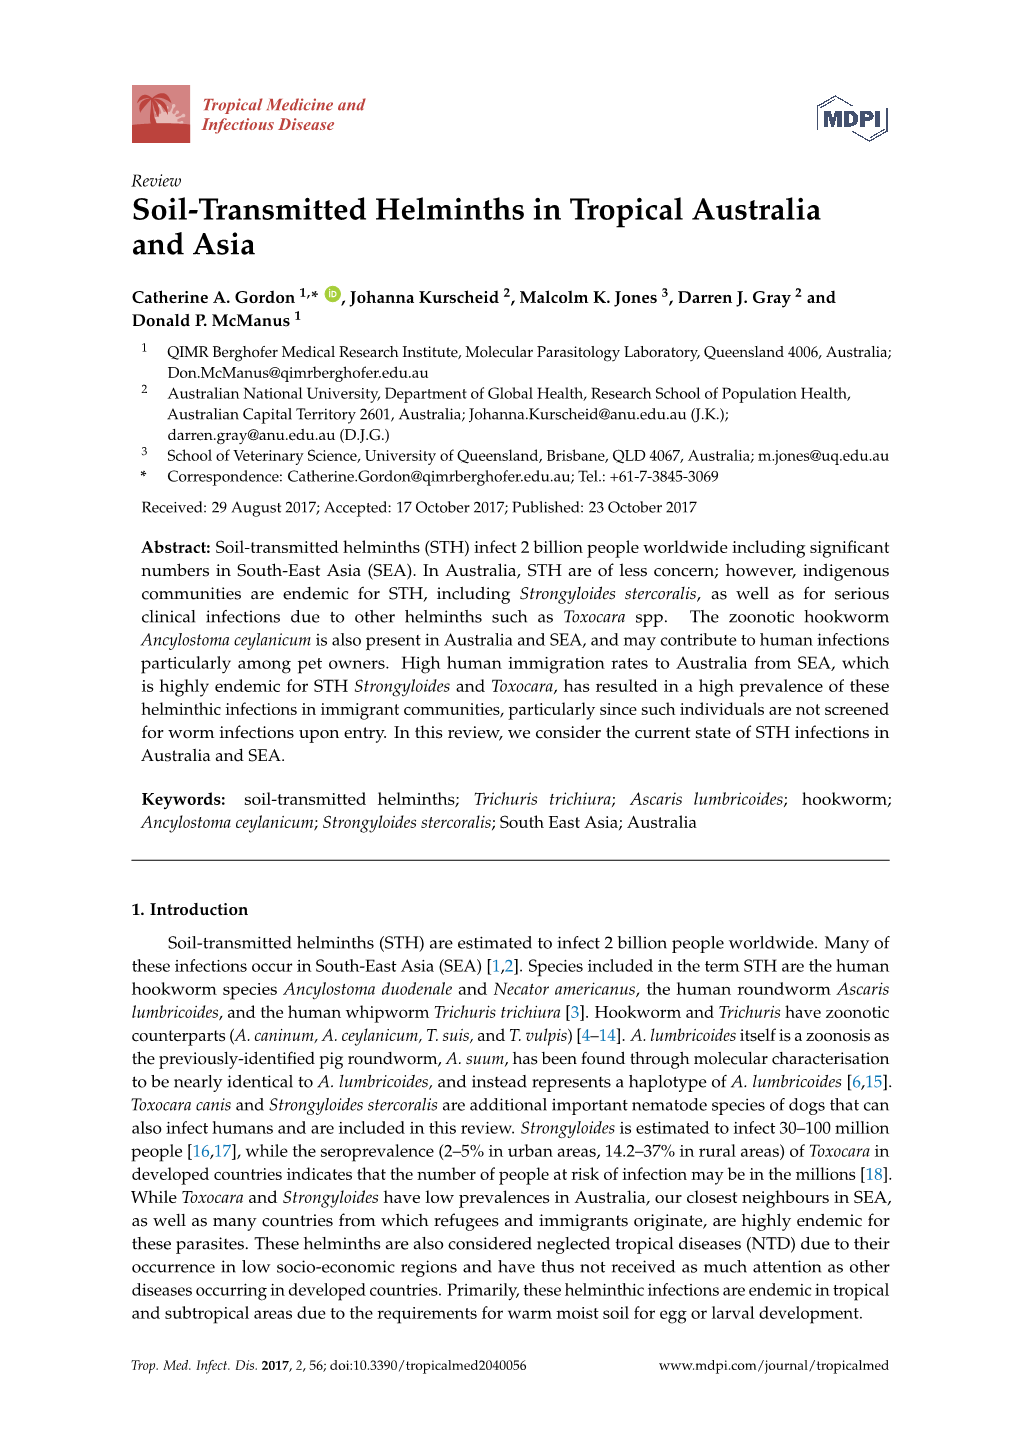 Soil-Transmitted Helminths in Tropical Australia and Asia